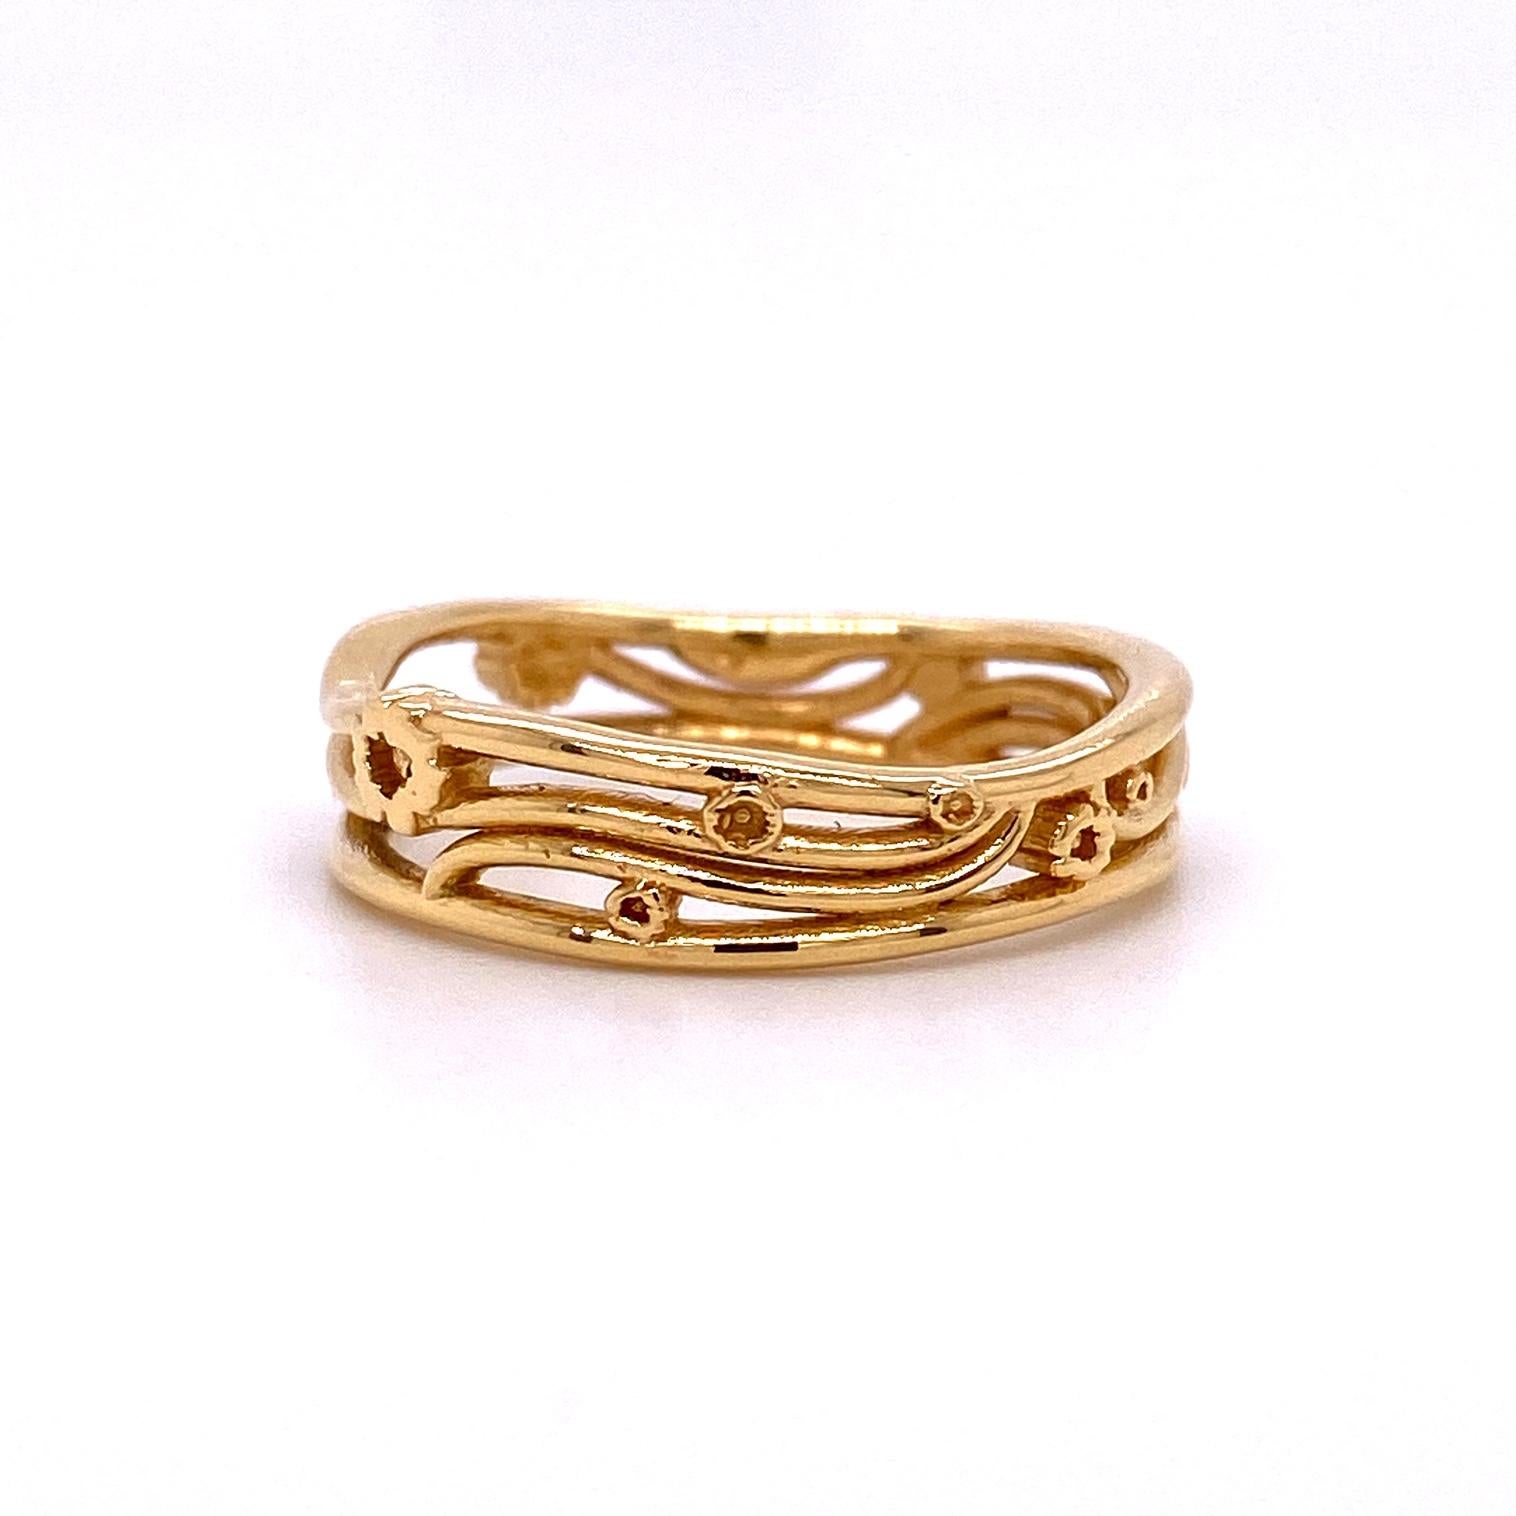 An 18k yellow gold Gustav Klimt inspired narrow band. Ring size 7. This ring was made and designed by llyn Strong.